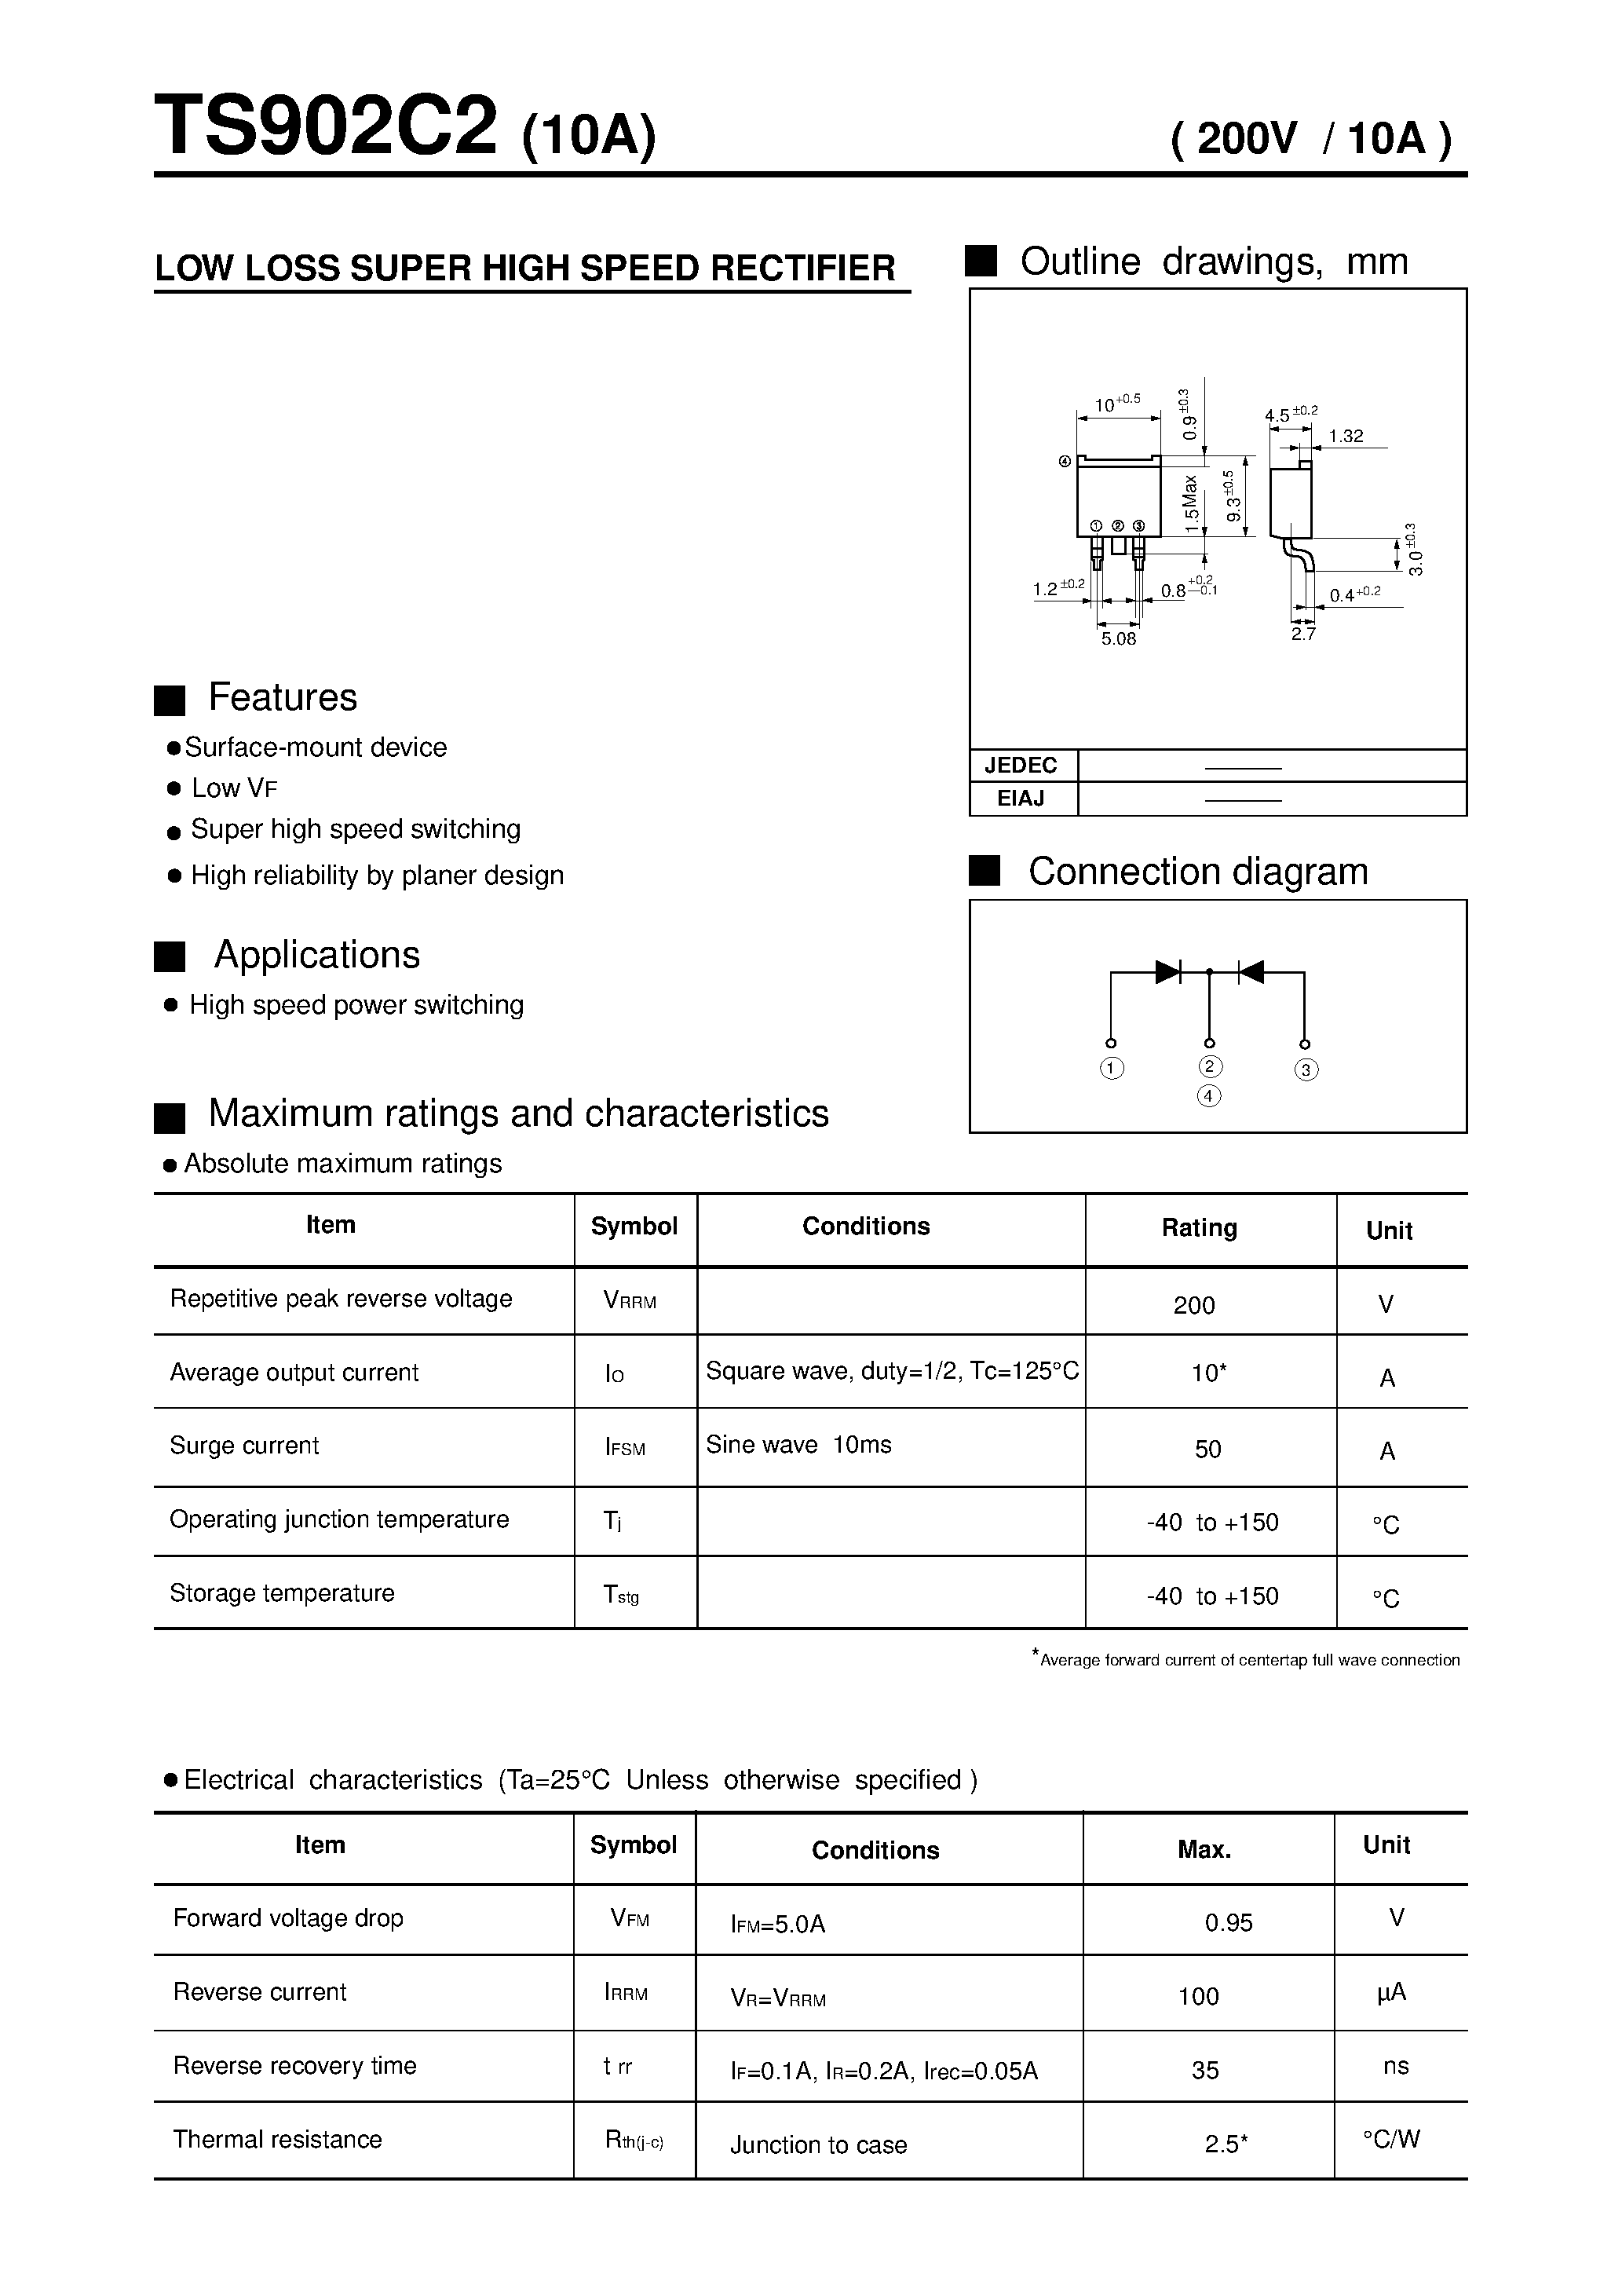 Datasheet TS902C2 - LOW LOSS SUPER HIGH SPEED RECTIFIER page 1